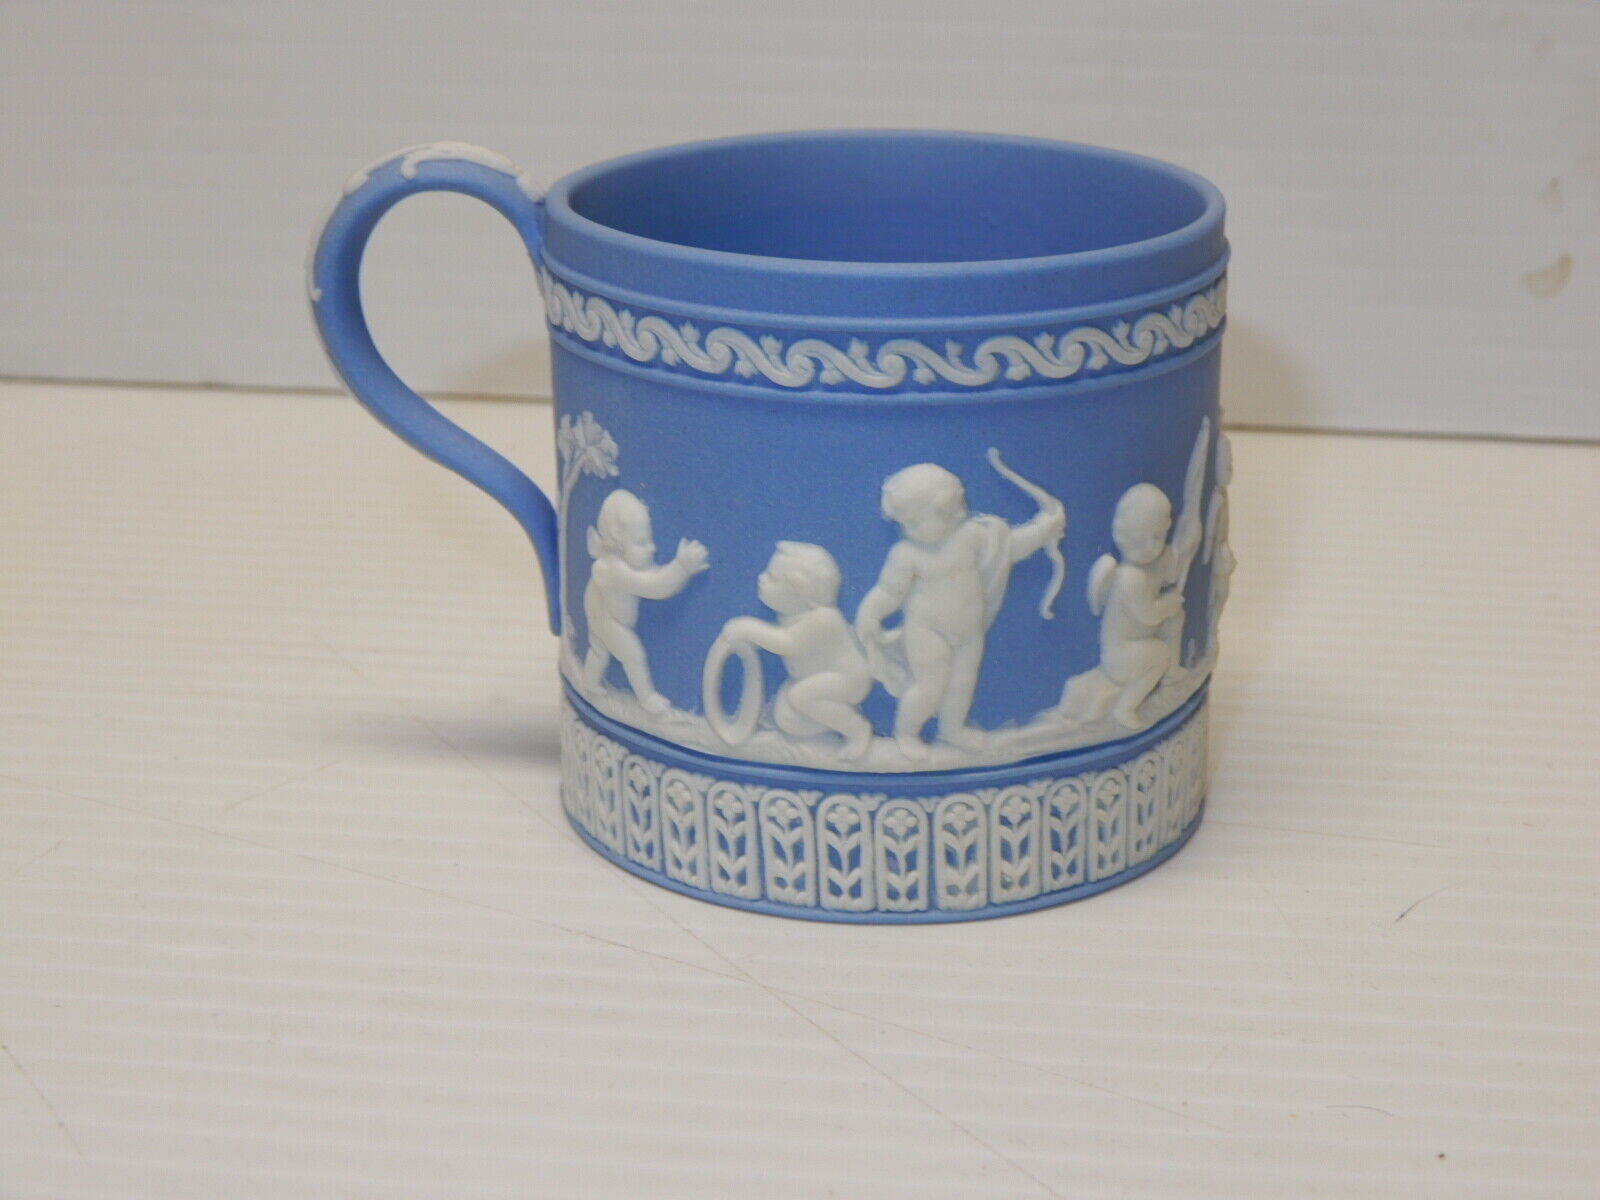 ANTIQUE WEDGWOOD ONLY SOLID BLUE JASPER COFFEE CAN CUP CA. 1800